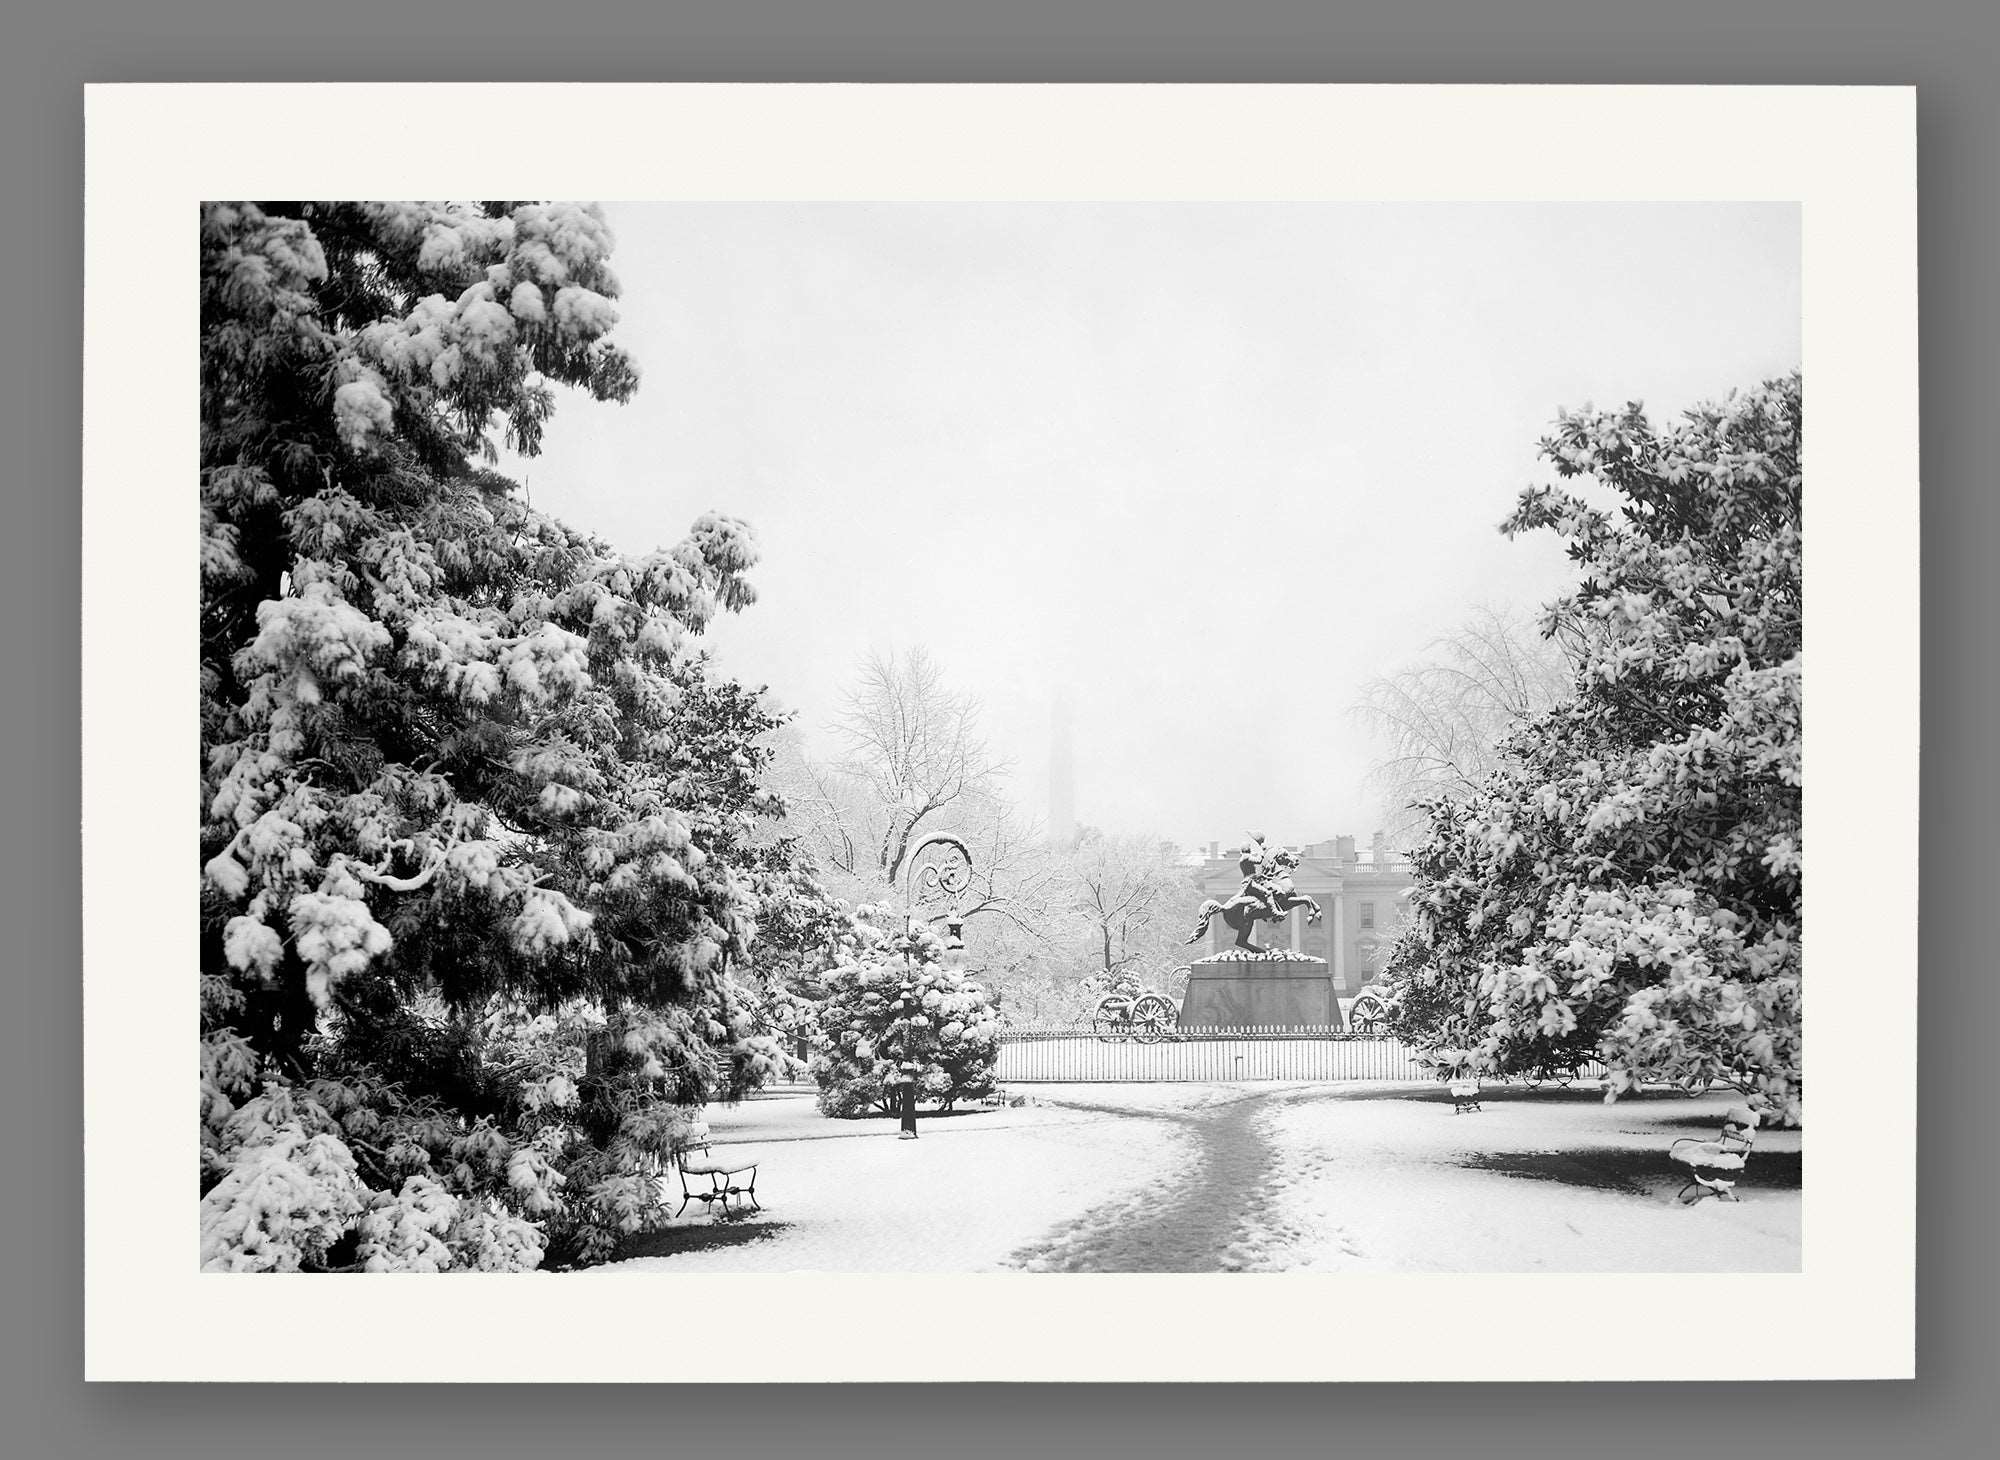 A paper print reproduction of a vintage photograph of Lafayette Park in the winter